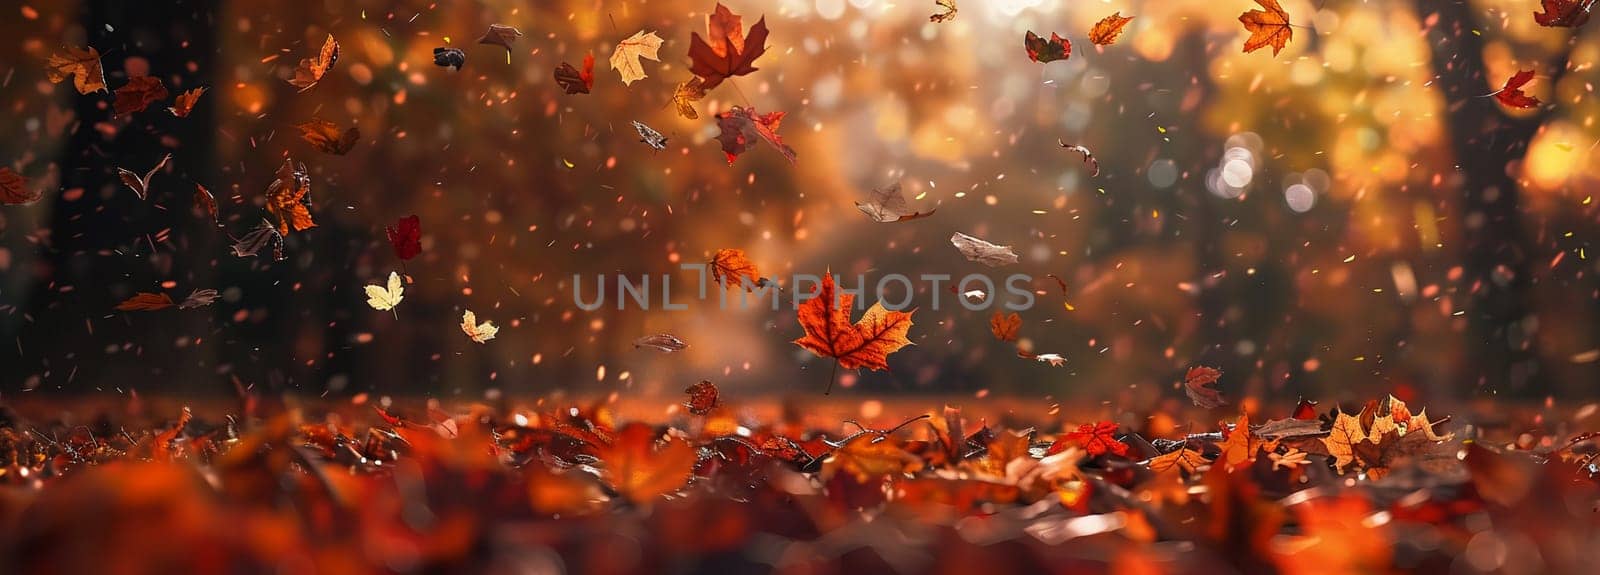 Golden autumn scenery in forest with colorful leaves falling from trees in warm sunlight, depicting seasonal change and nature's beauty.